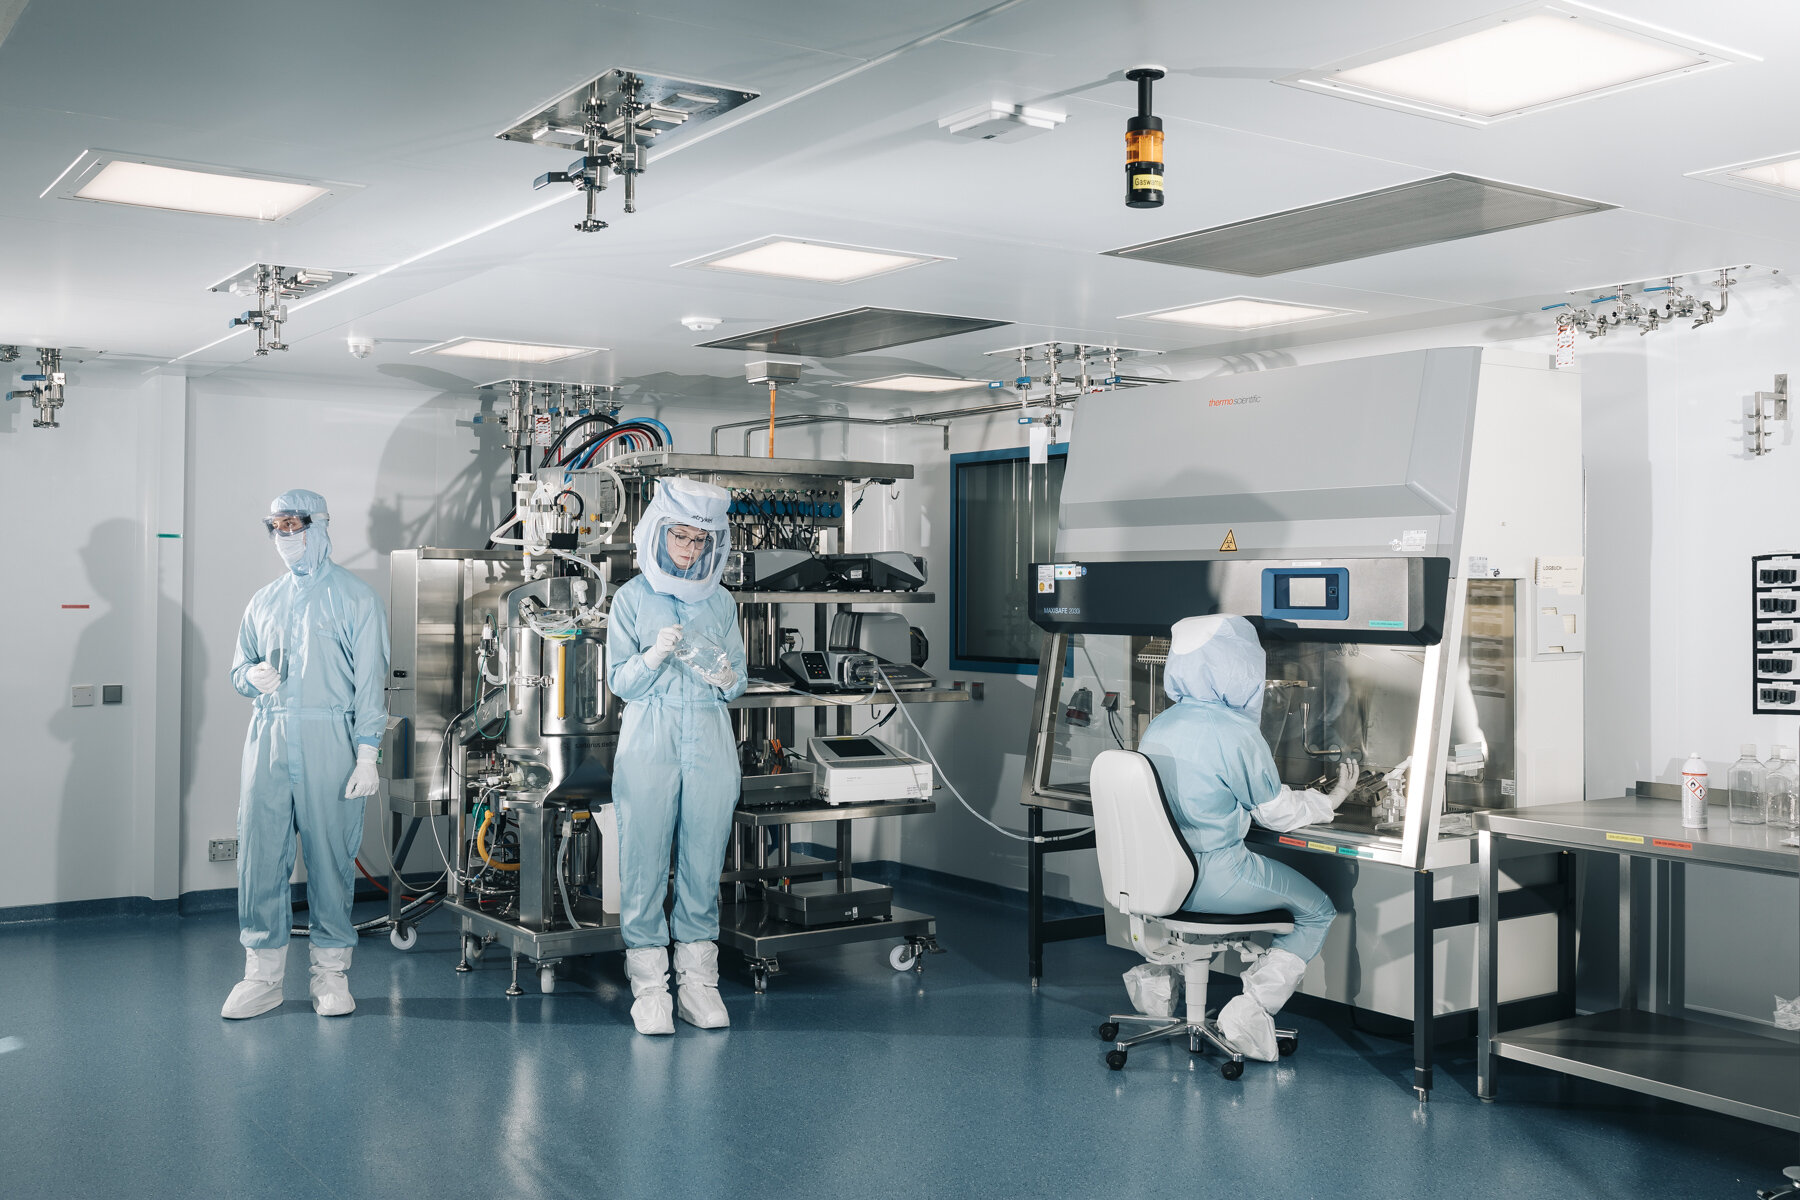  Biontech employees at the Biontech plant in Marburg  show how they work on the bioreactor in cleanroom suits. From April 2021 more than one billion doses of Vaccine can be produced here annually.  